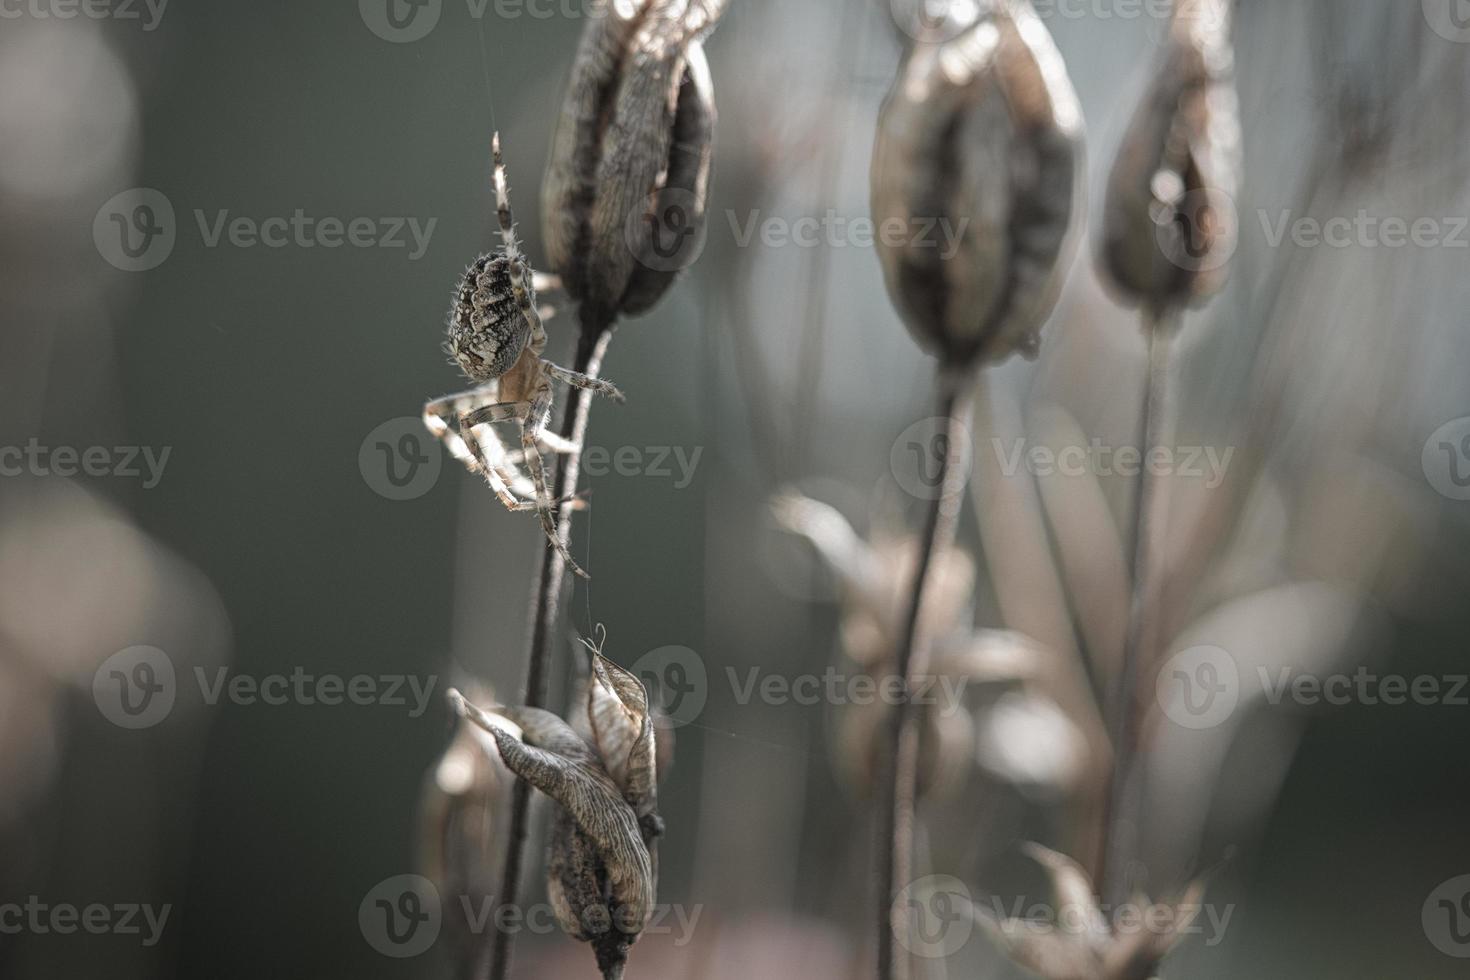 Cross spider crawling on a spider thread to a plant. A useful hunter among insects photo